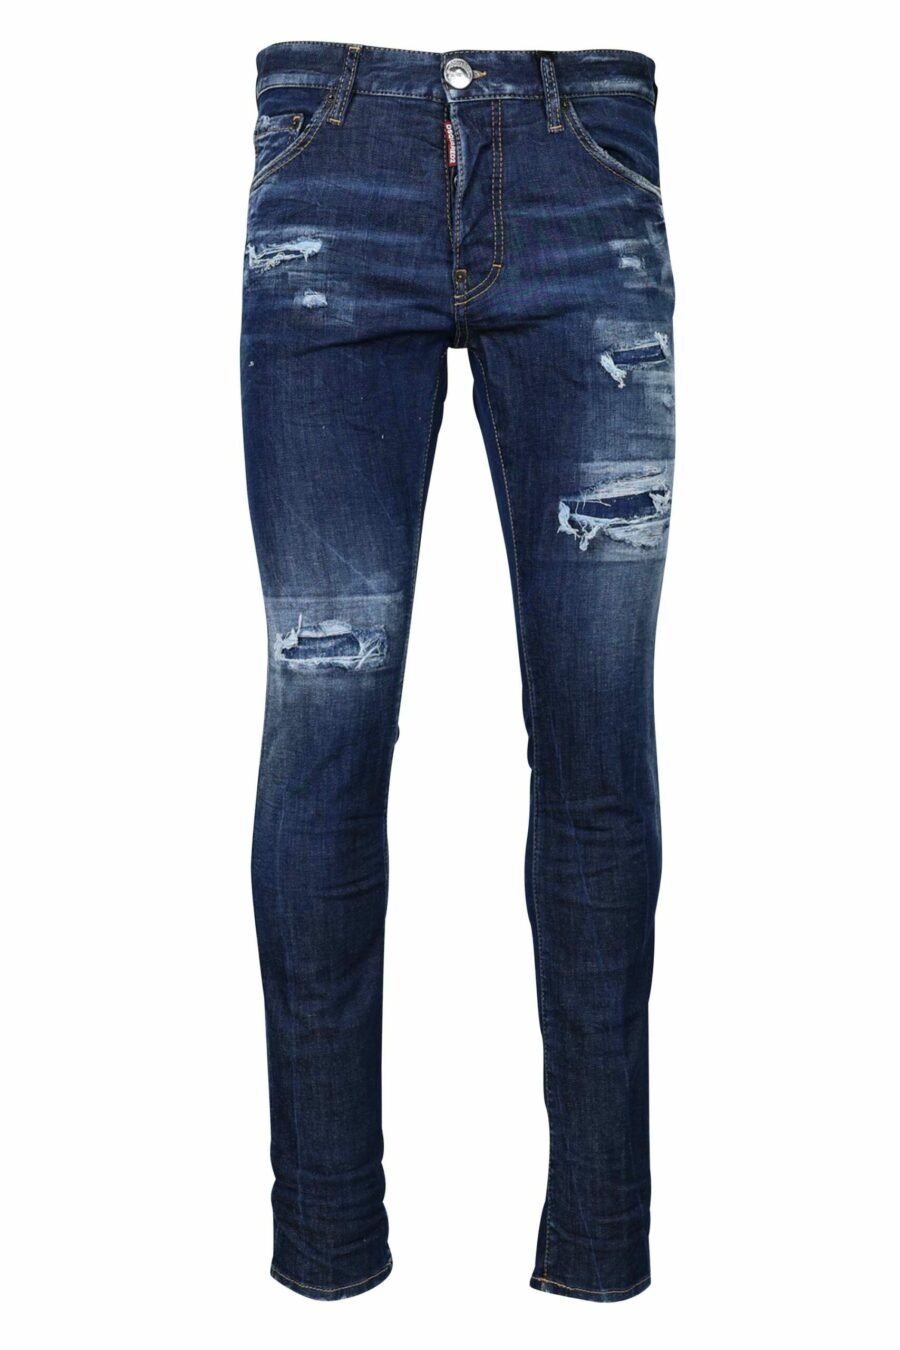 Cool guy" blue semi-worn jeans - 8054148105396 scaled